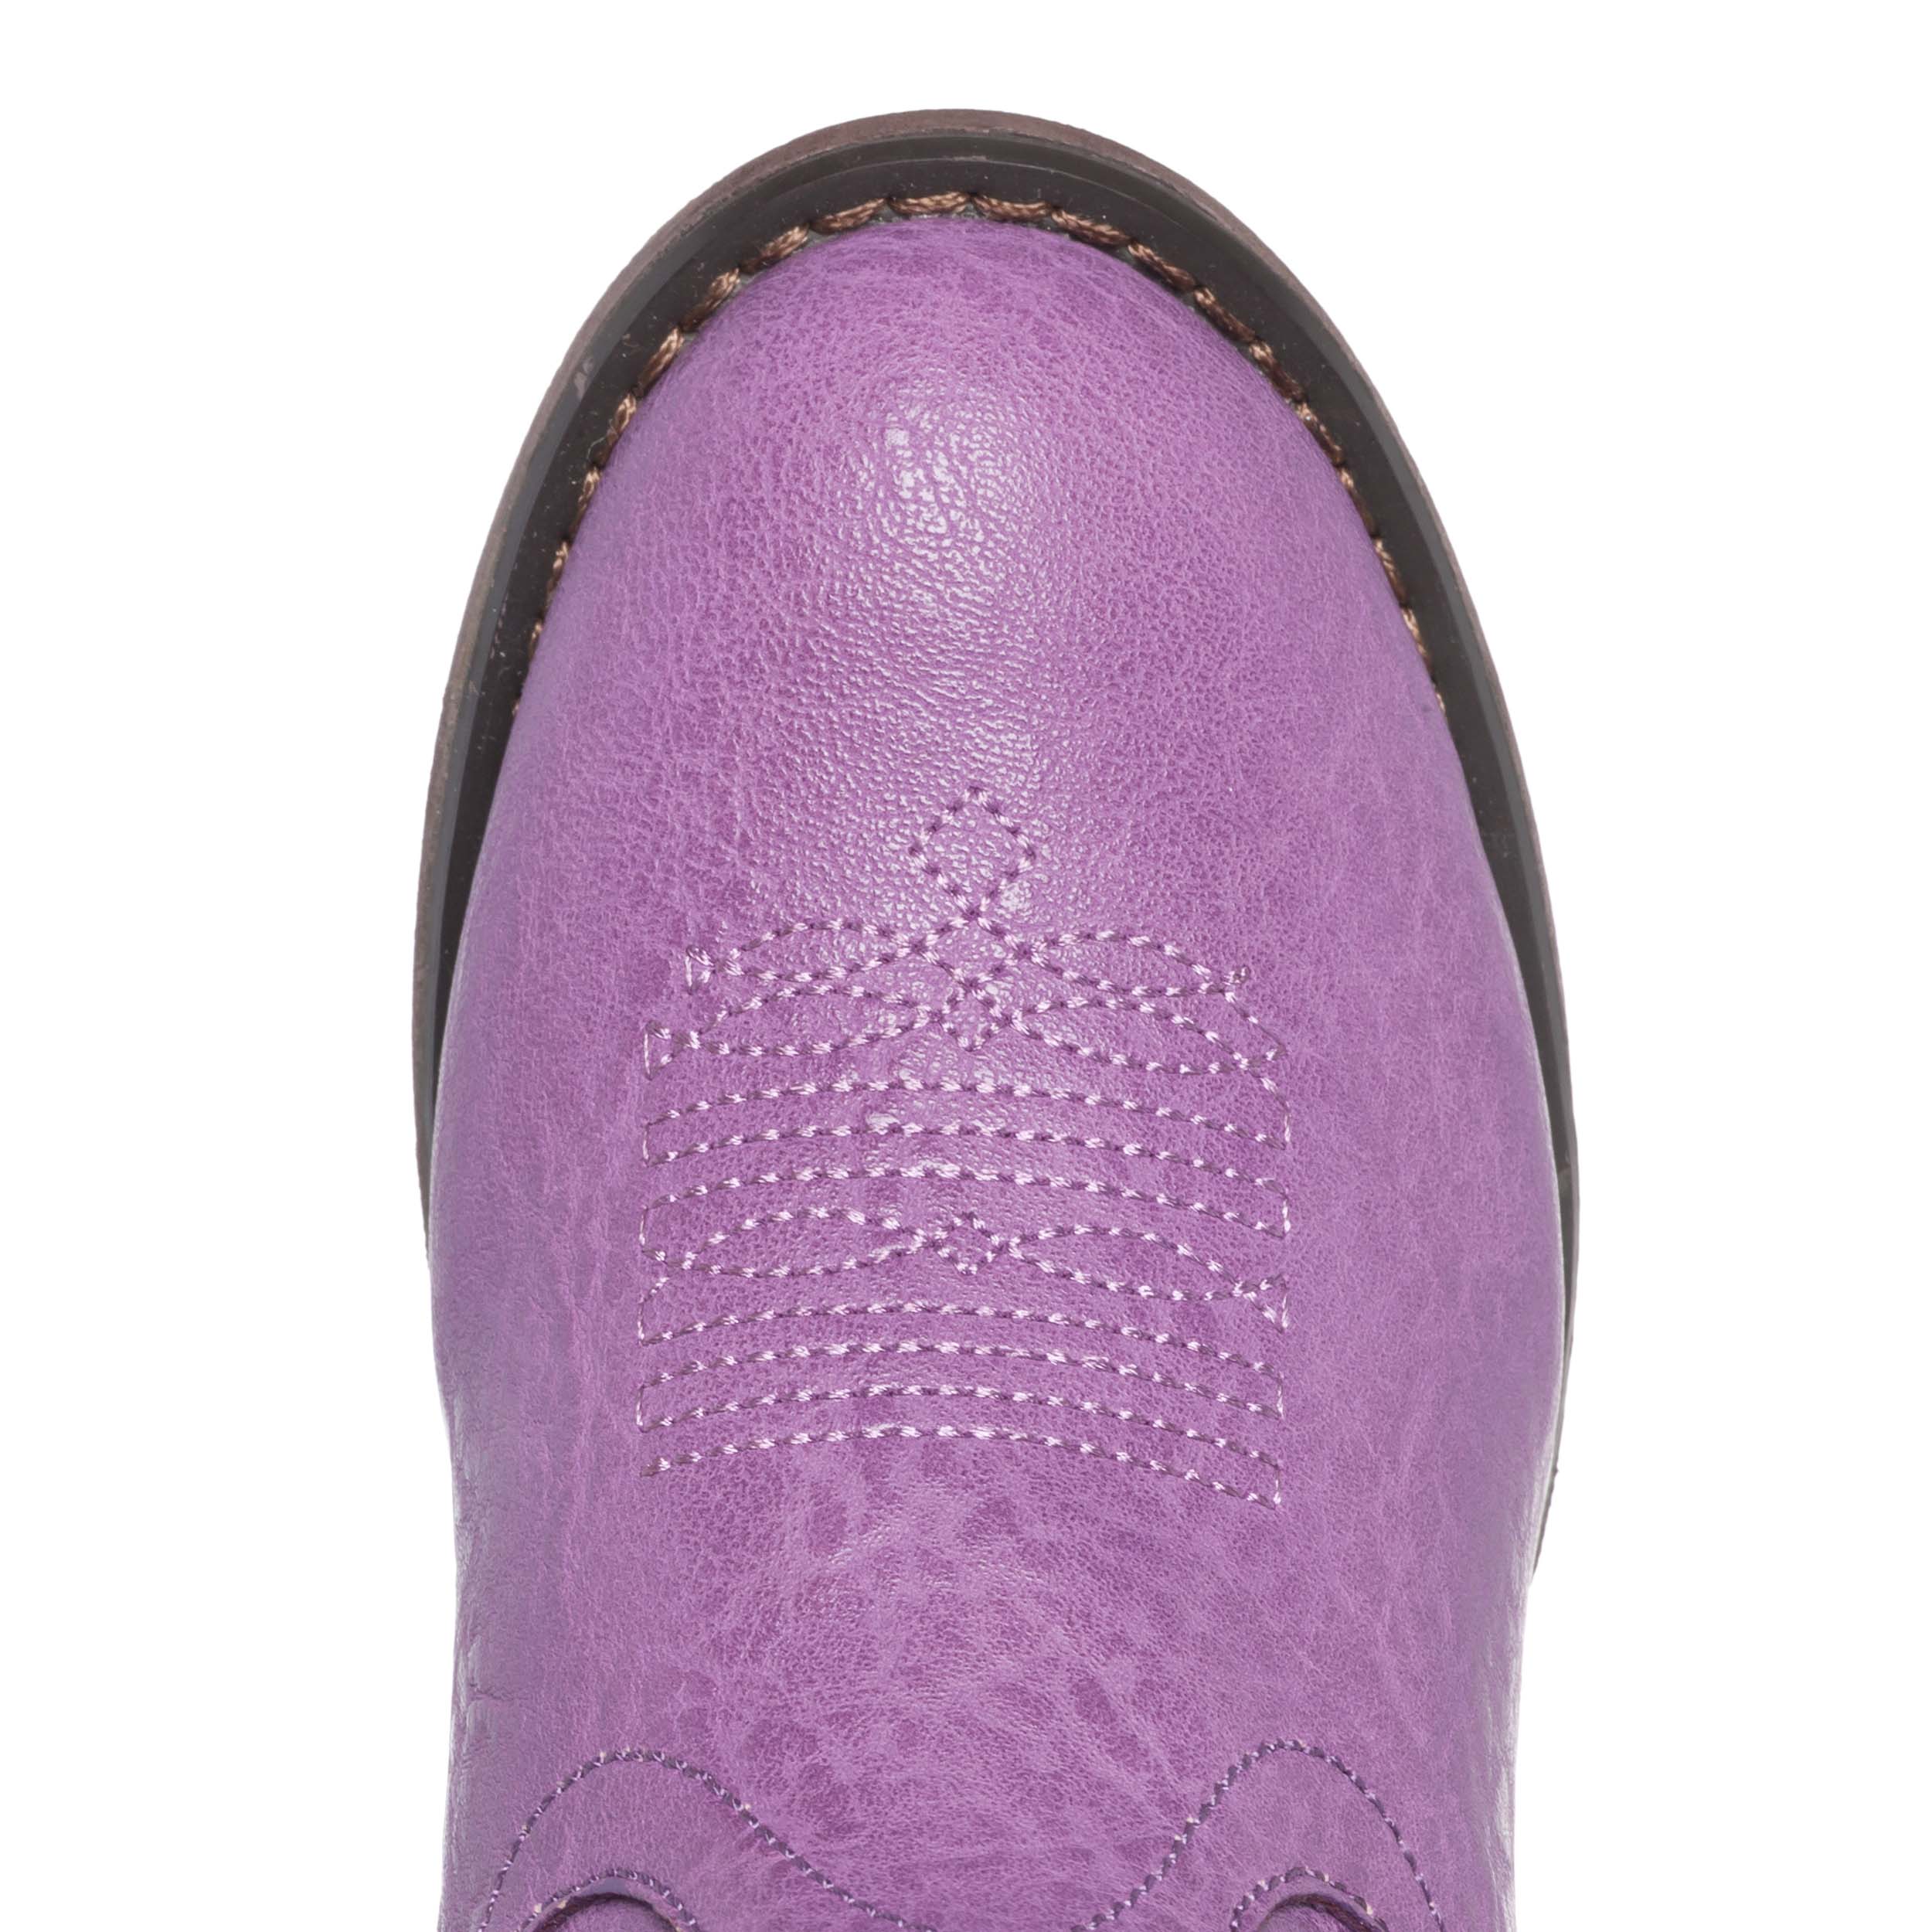 Children Western Kids Cowboy Boot | Monterey Purple for Girls by Silver Canyon